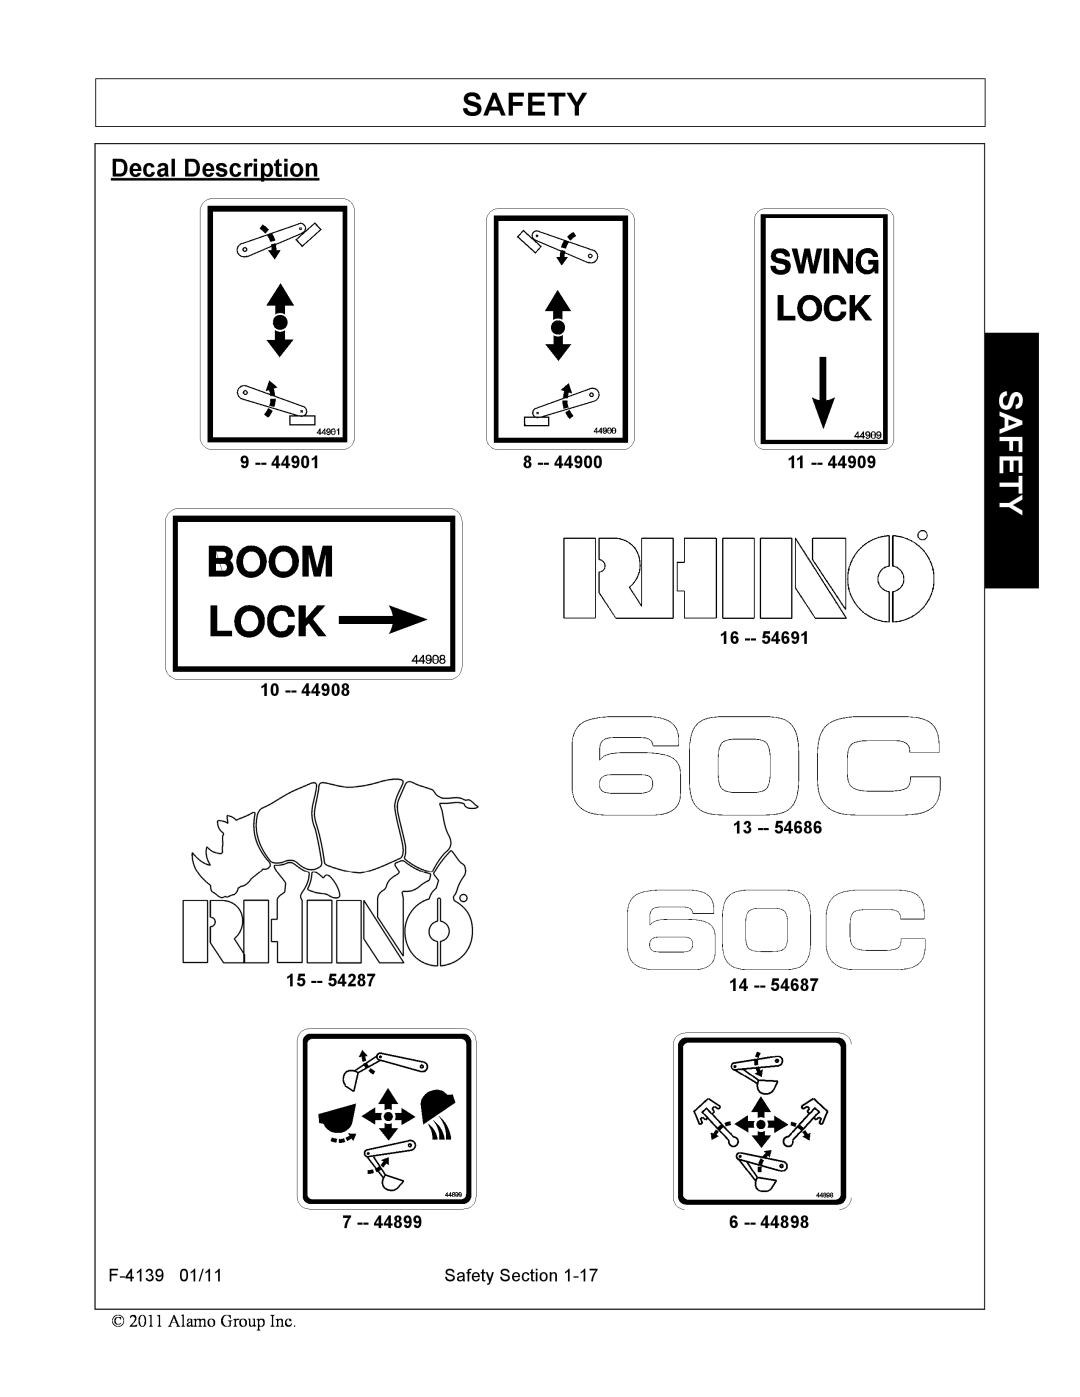 Servis-Rhino 60C manual Decal Description, 44901, 44900, 44909, 16 10 13, F-413901/11, Safety Section, Alamo Group Inc 